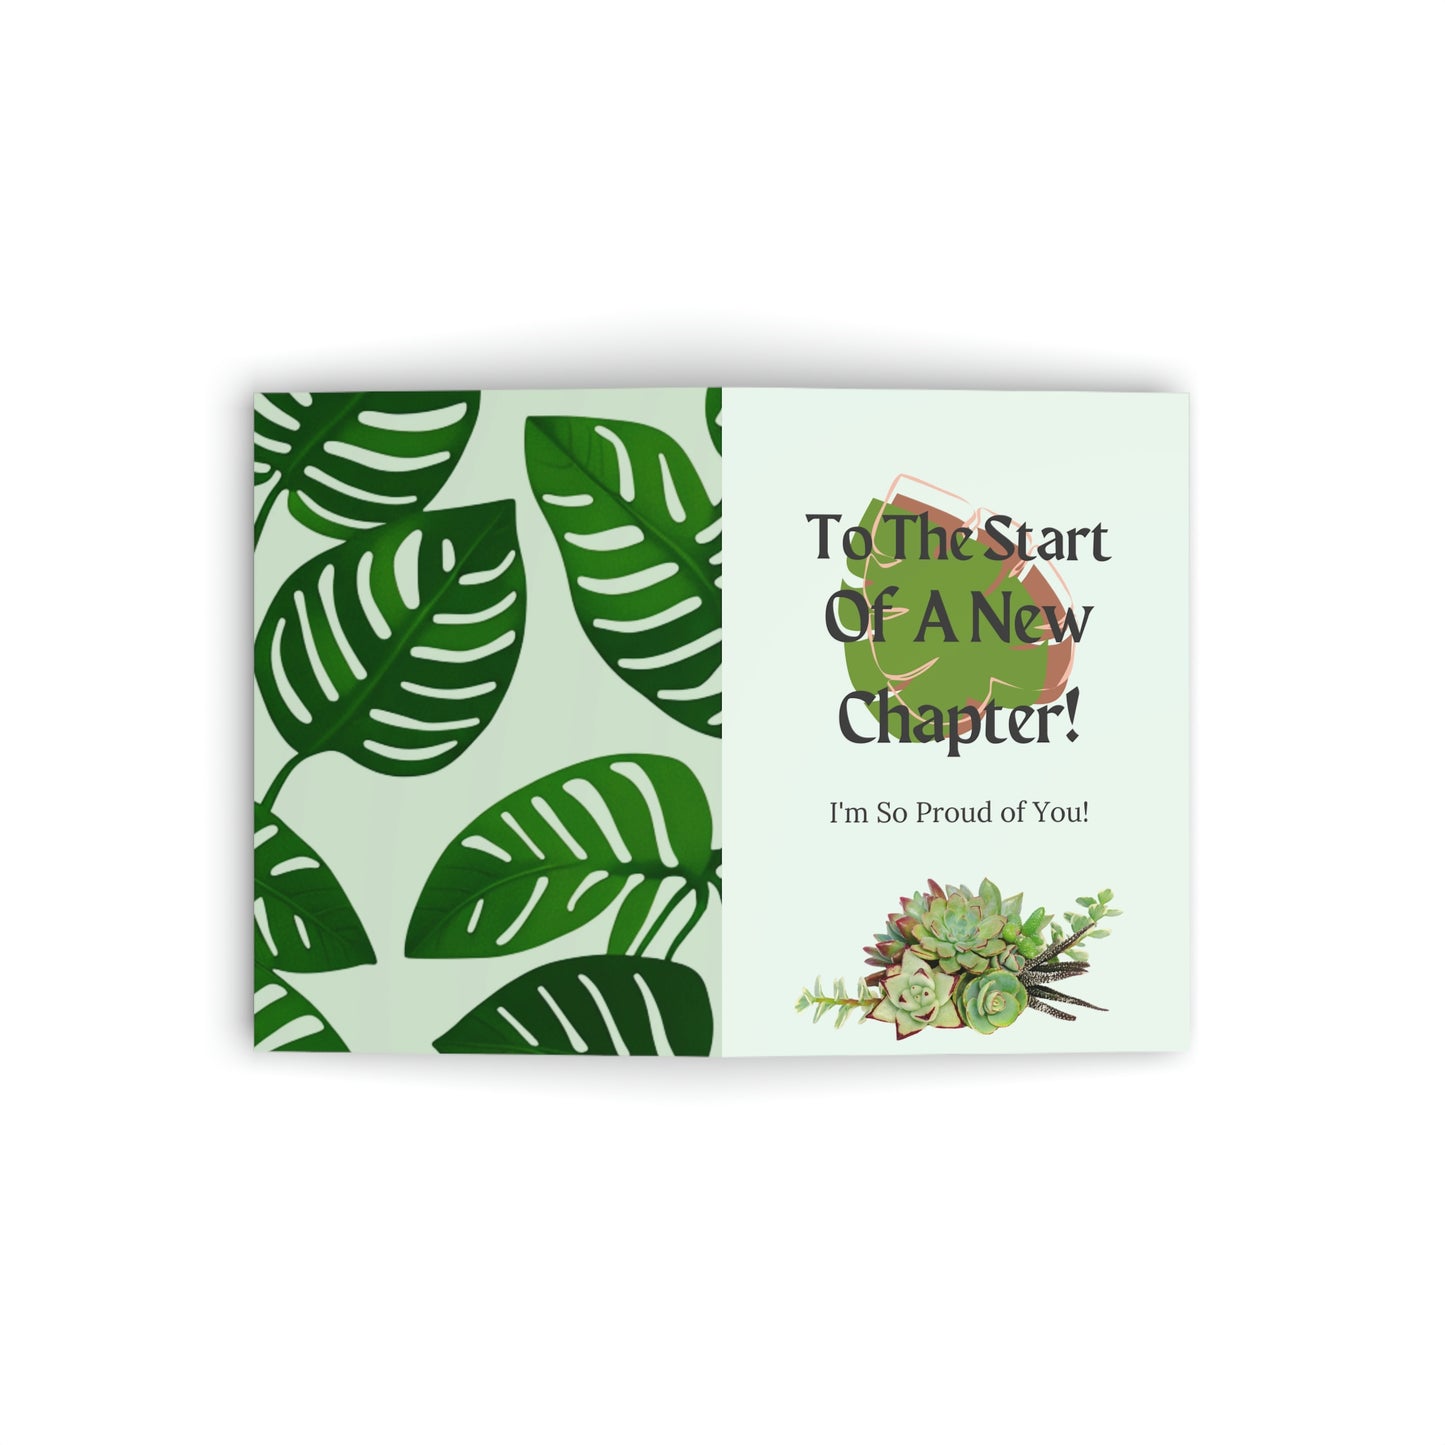 New Plants New Places -  Uncommon Greeting Cards for Common Occasions